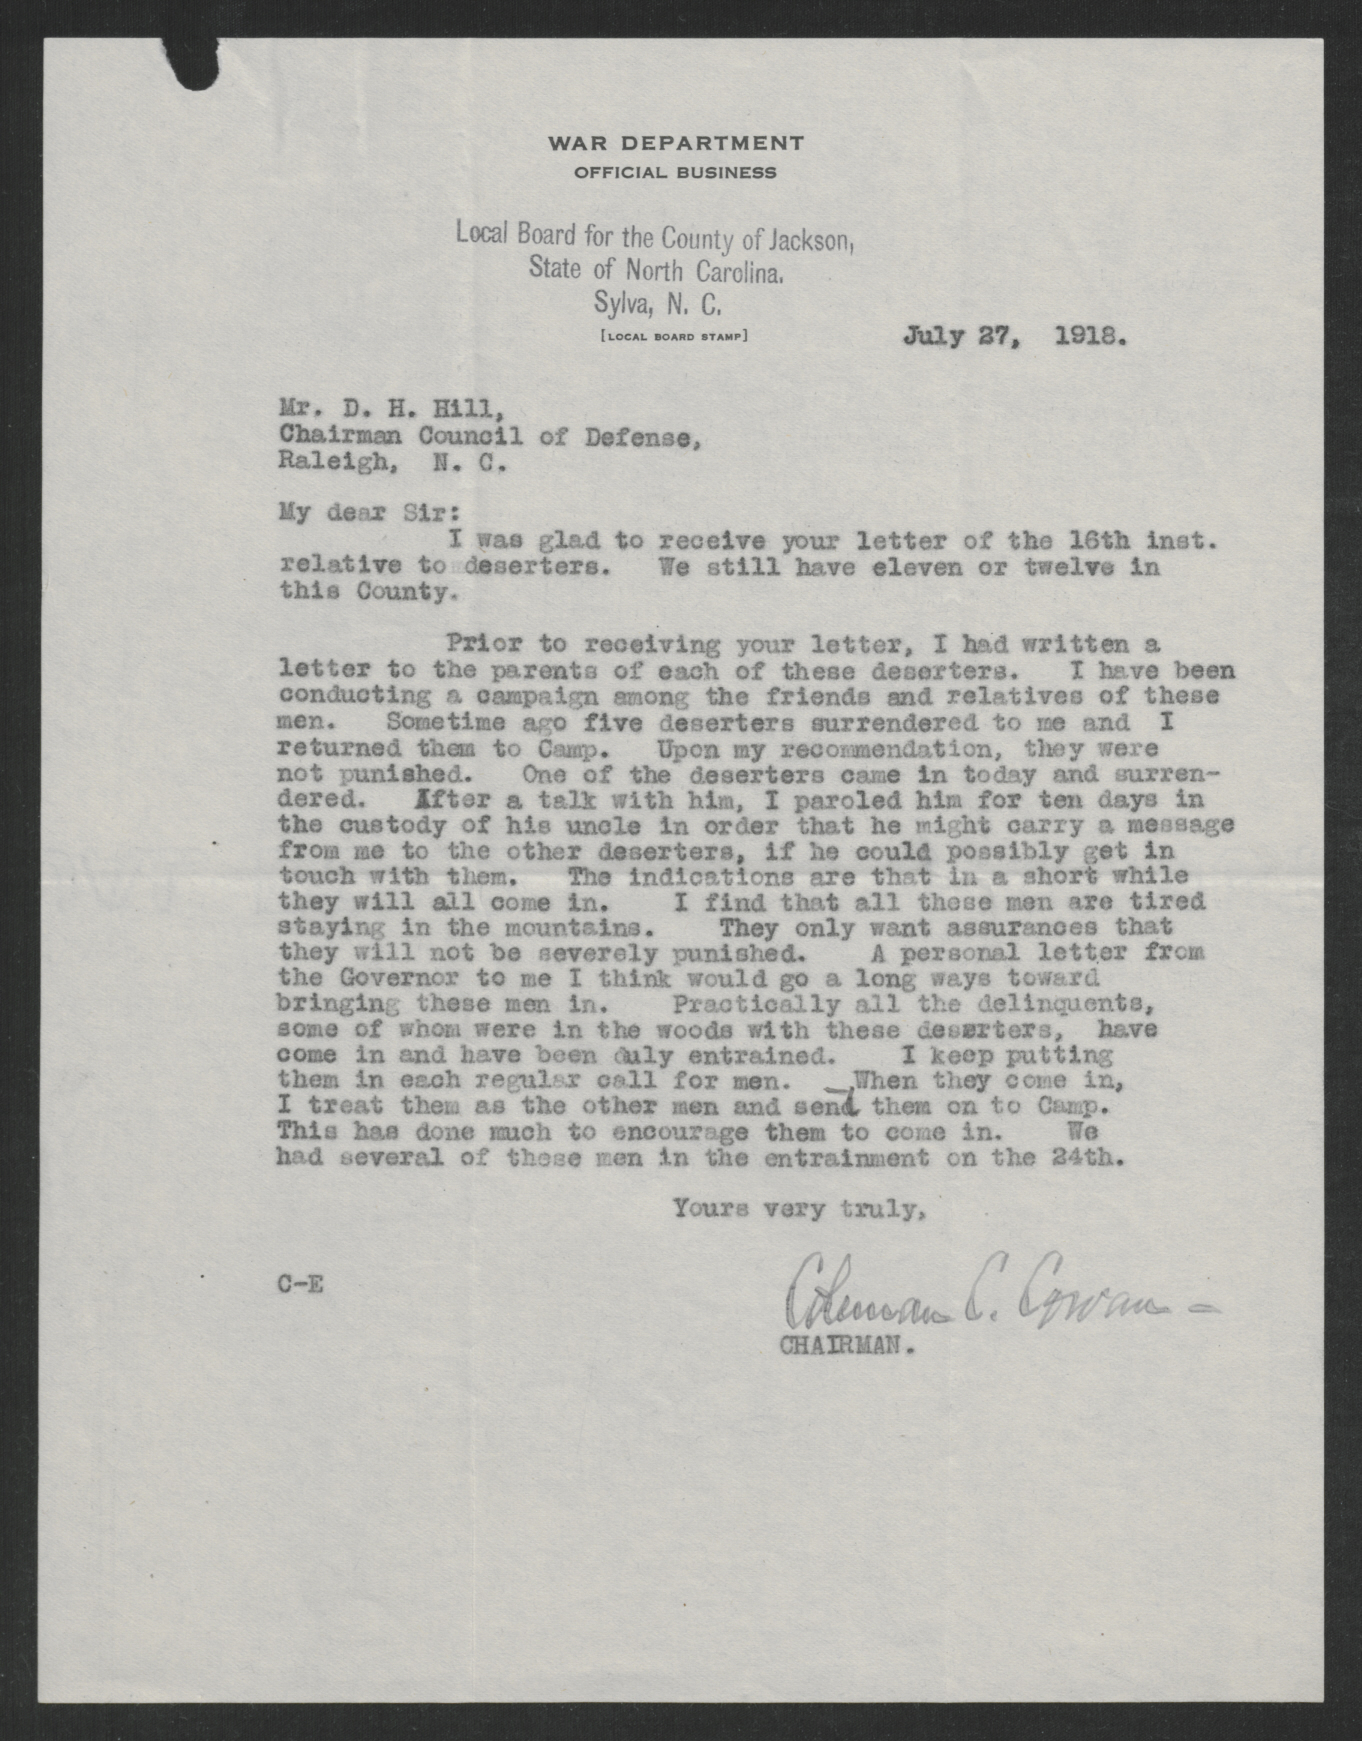 Letter from Coleman C. Cowan to Daniel H. Hill, July 27, 1918